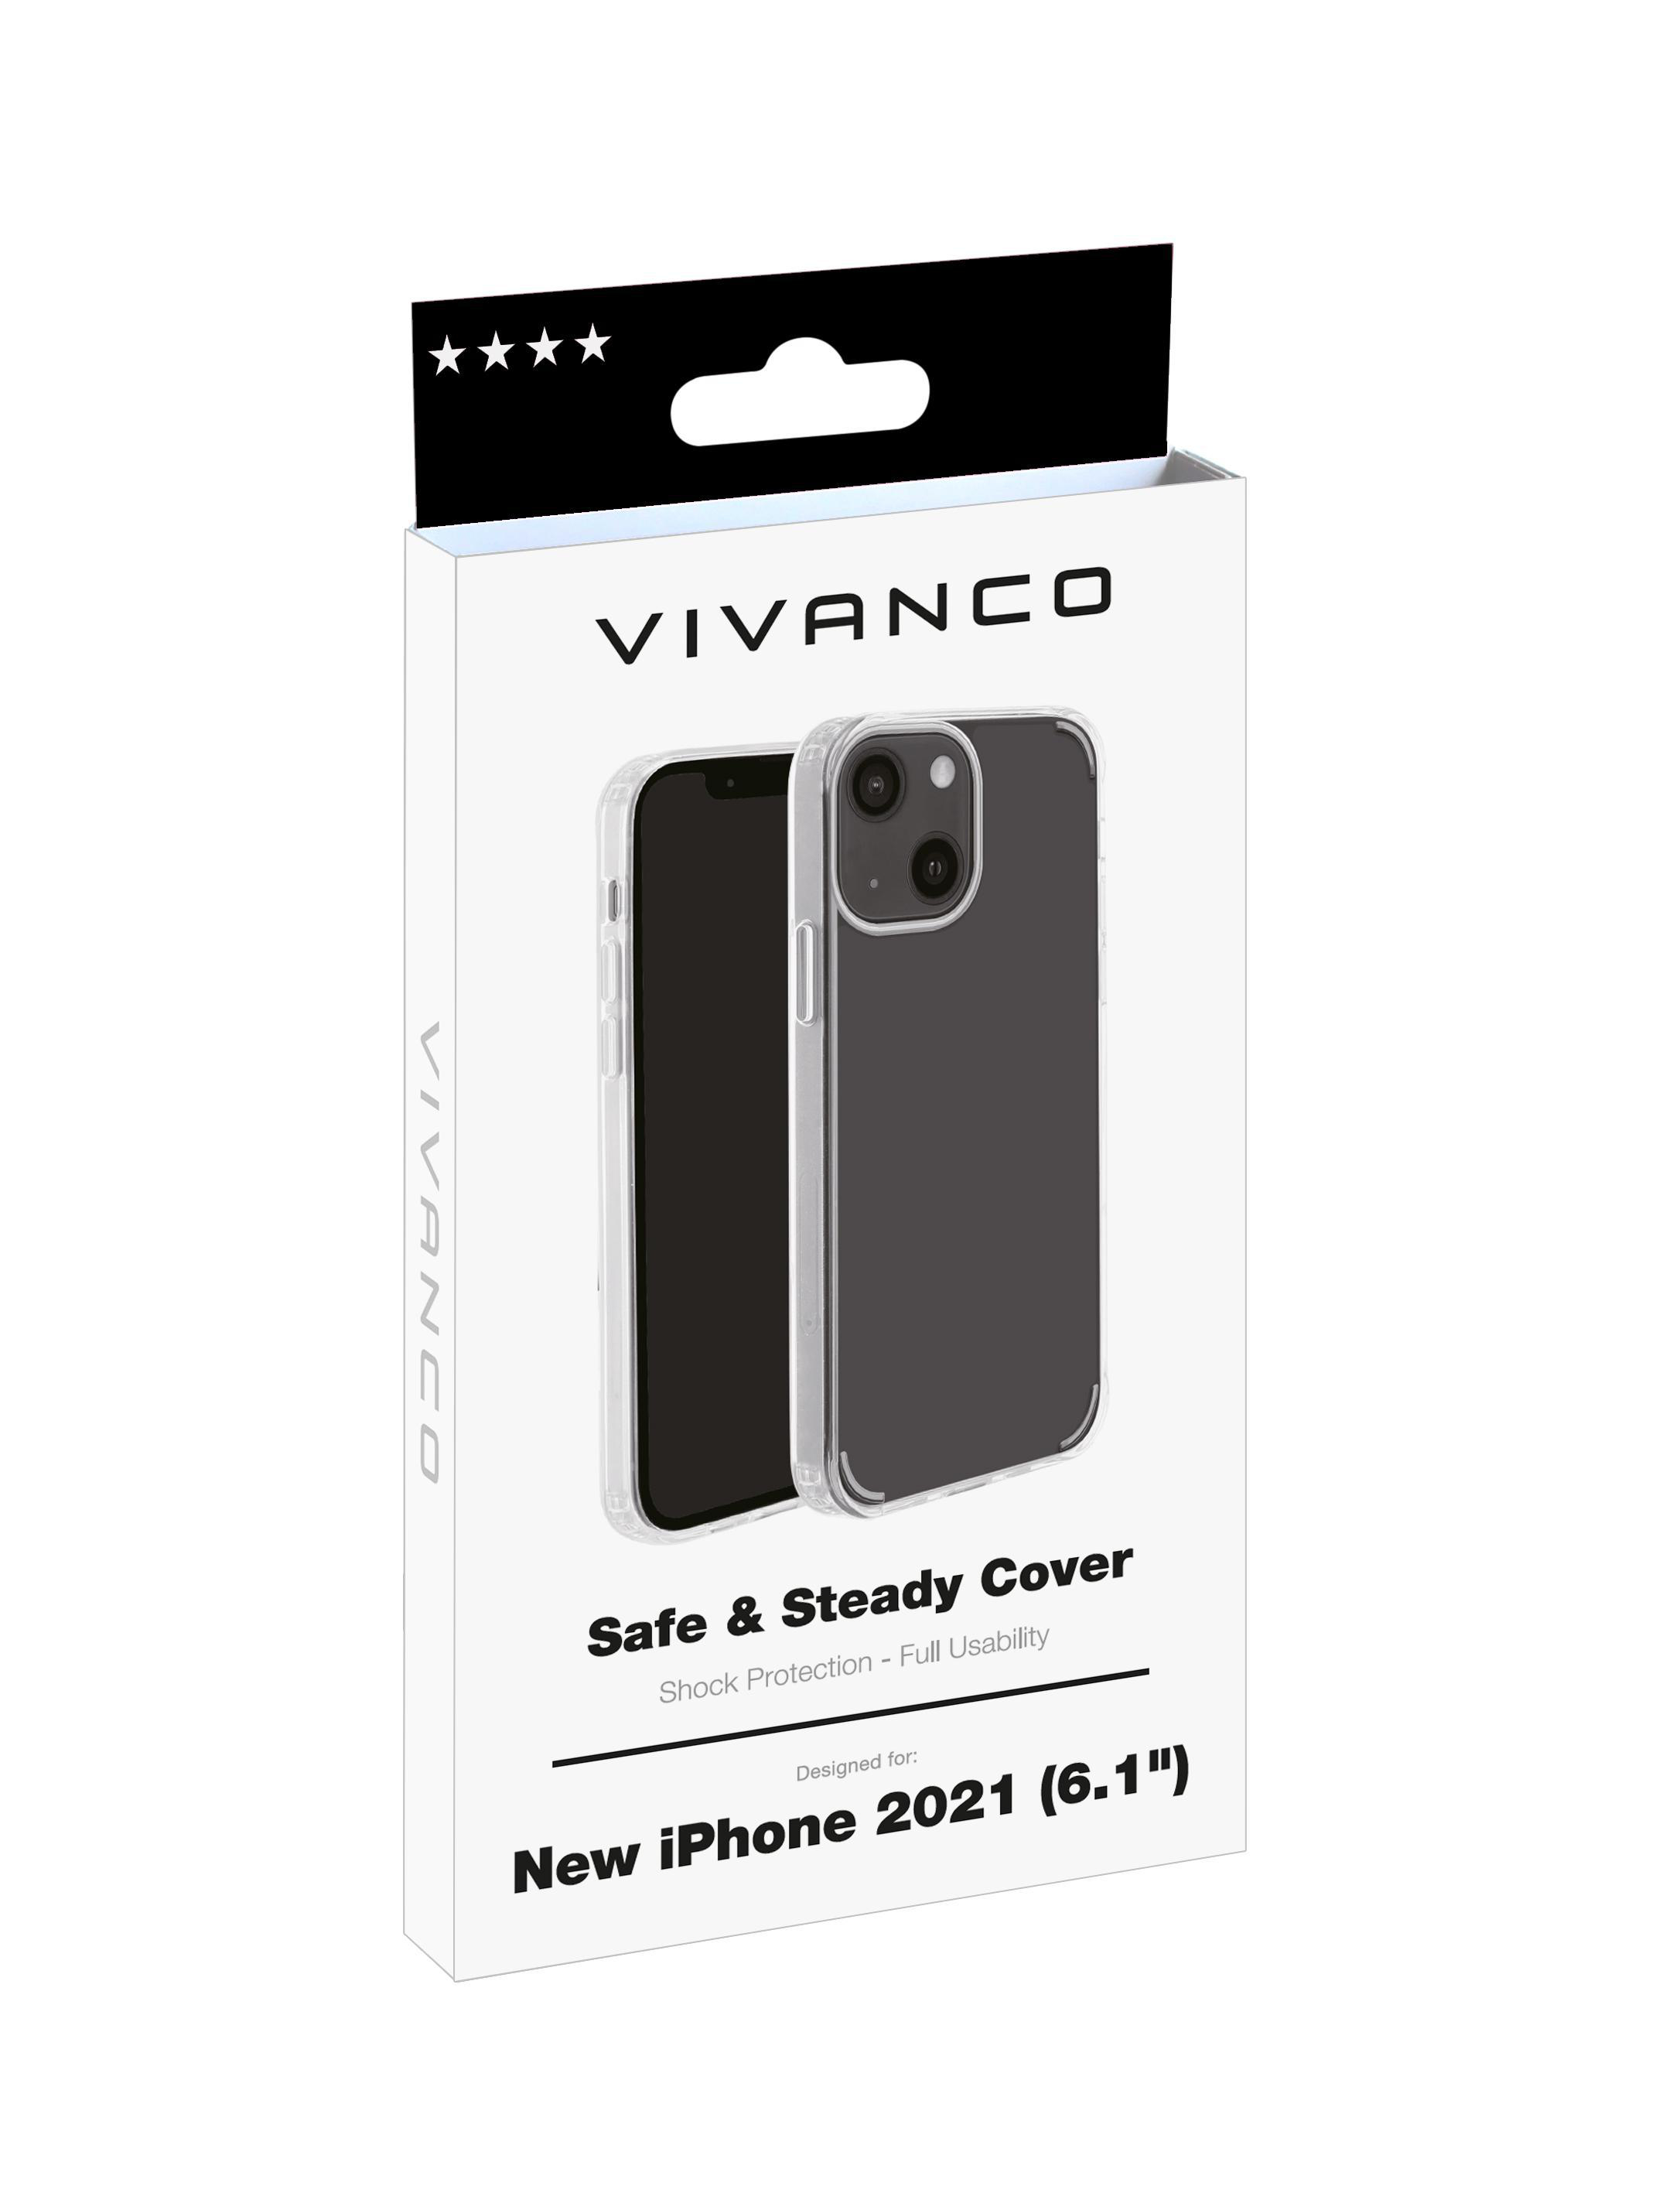 Apple, Safe VIVANCO and Backcover, steady, Transparent iPhone 13,